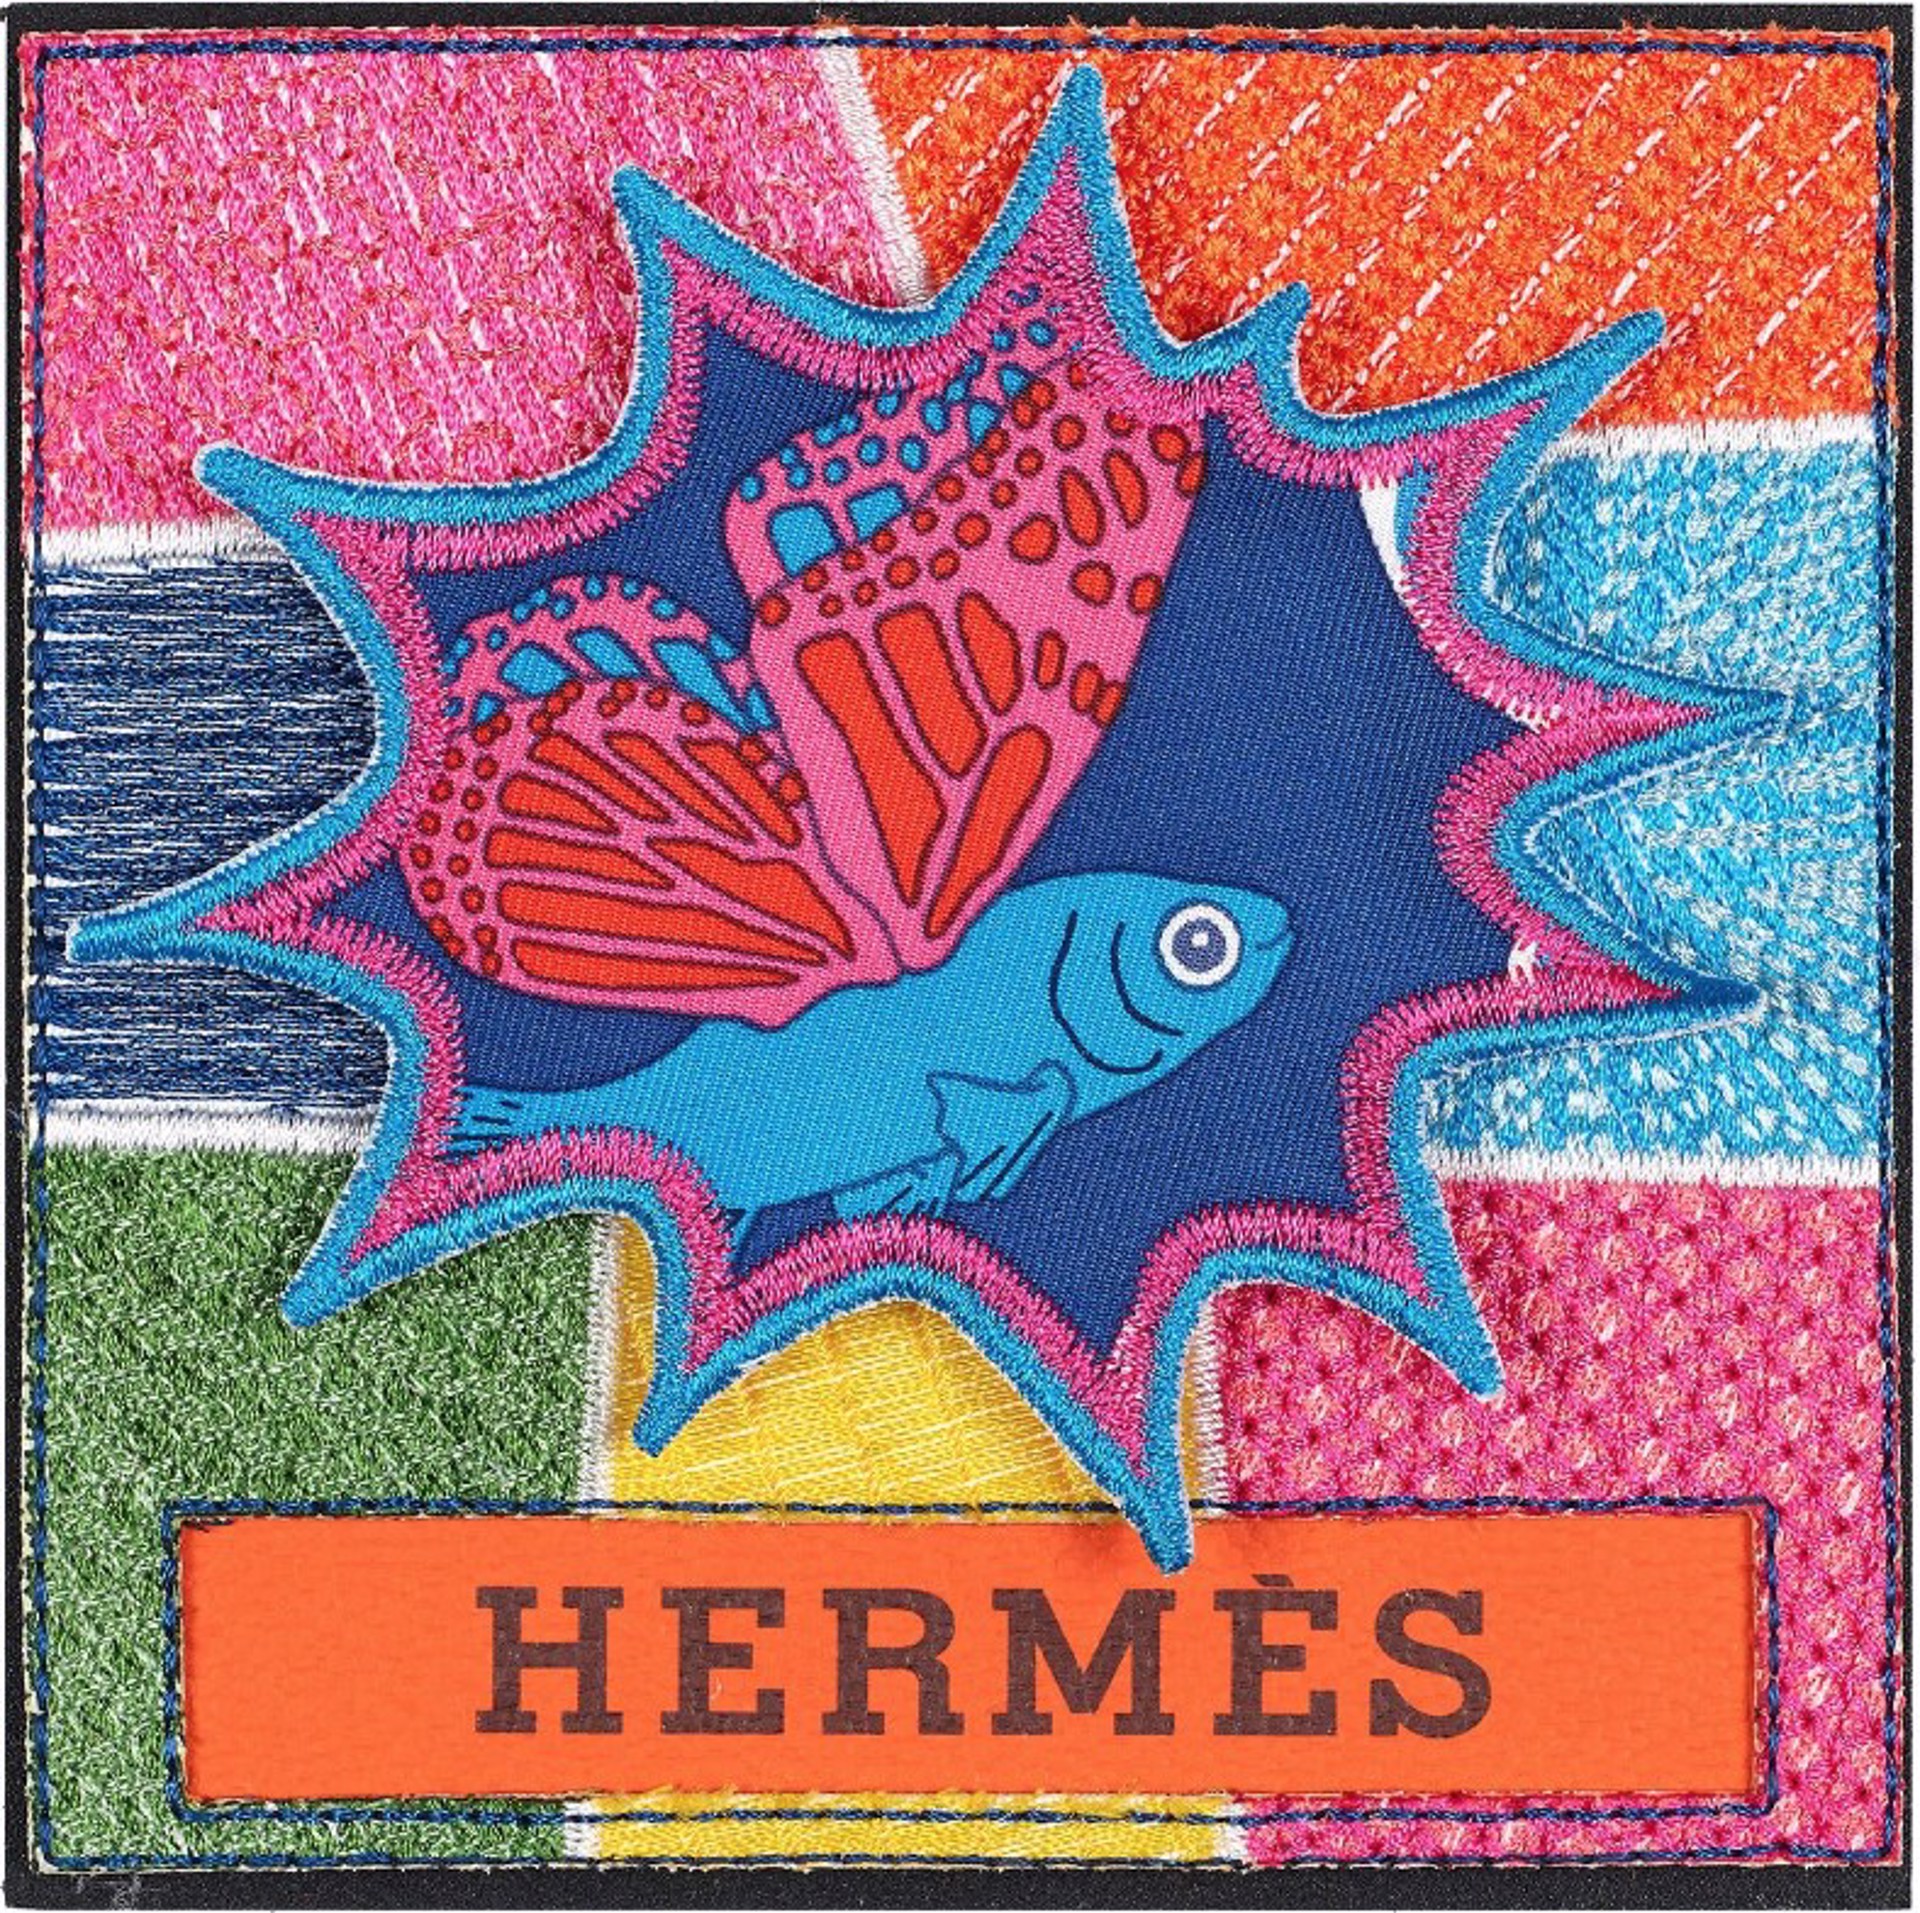 Hermes Petite Fish Thought Bubble by Stephen Wilson